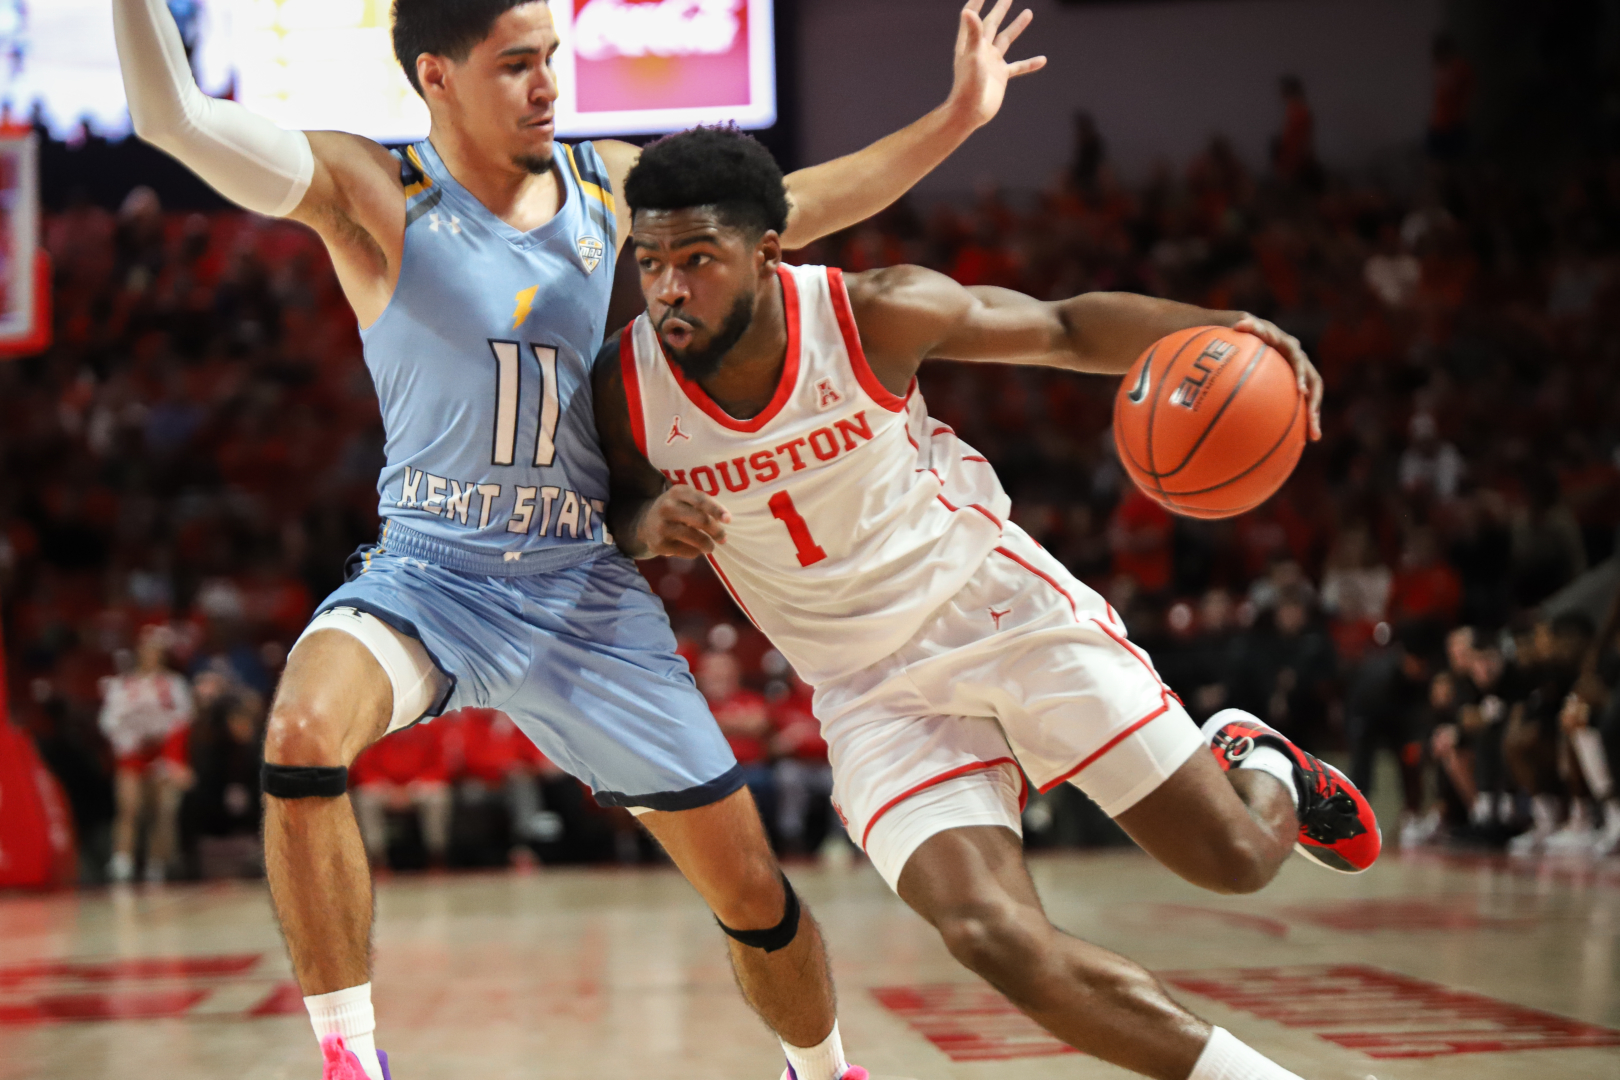 UH point guard Jamal Shead's layup with under a minute remaining proved to be the game-winner for the Cougars in their victory over Kent State on Saturday at Fertitta Center. | Anh Le/The Cougar